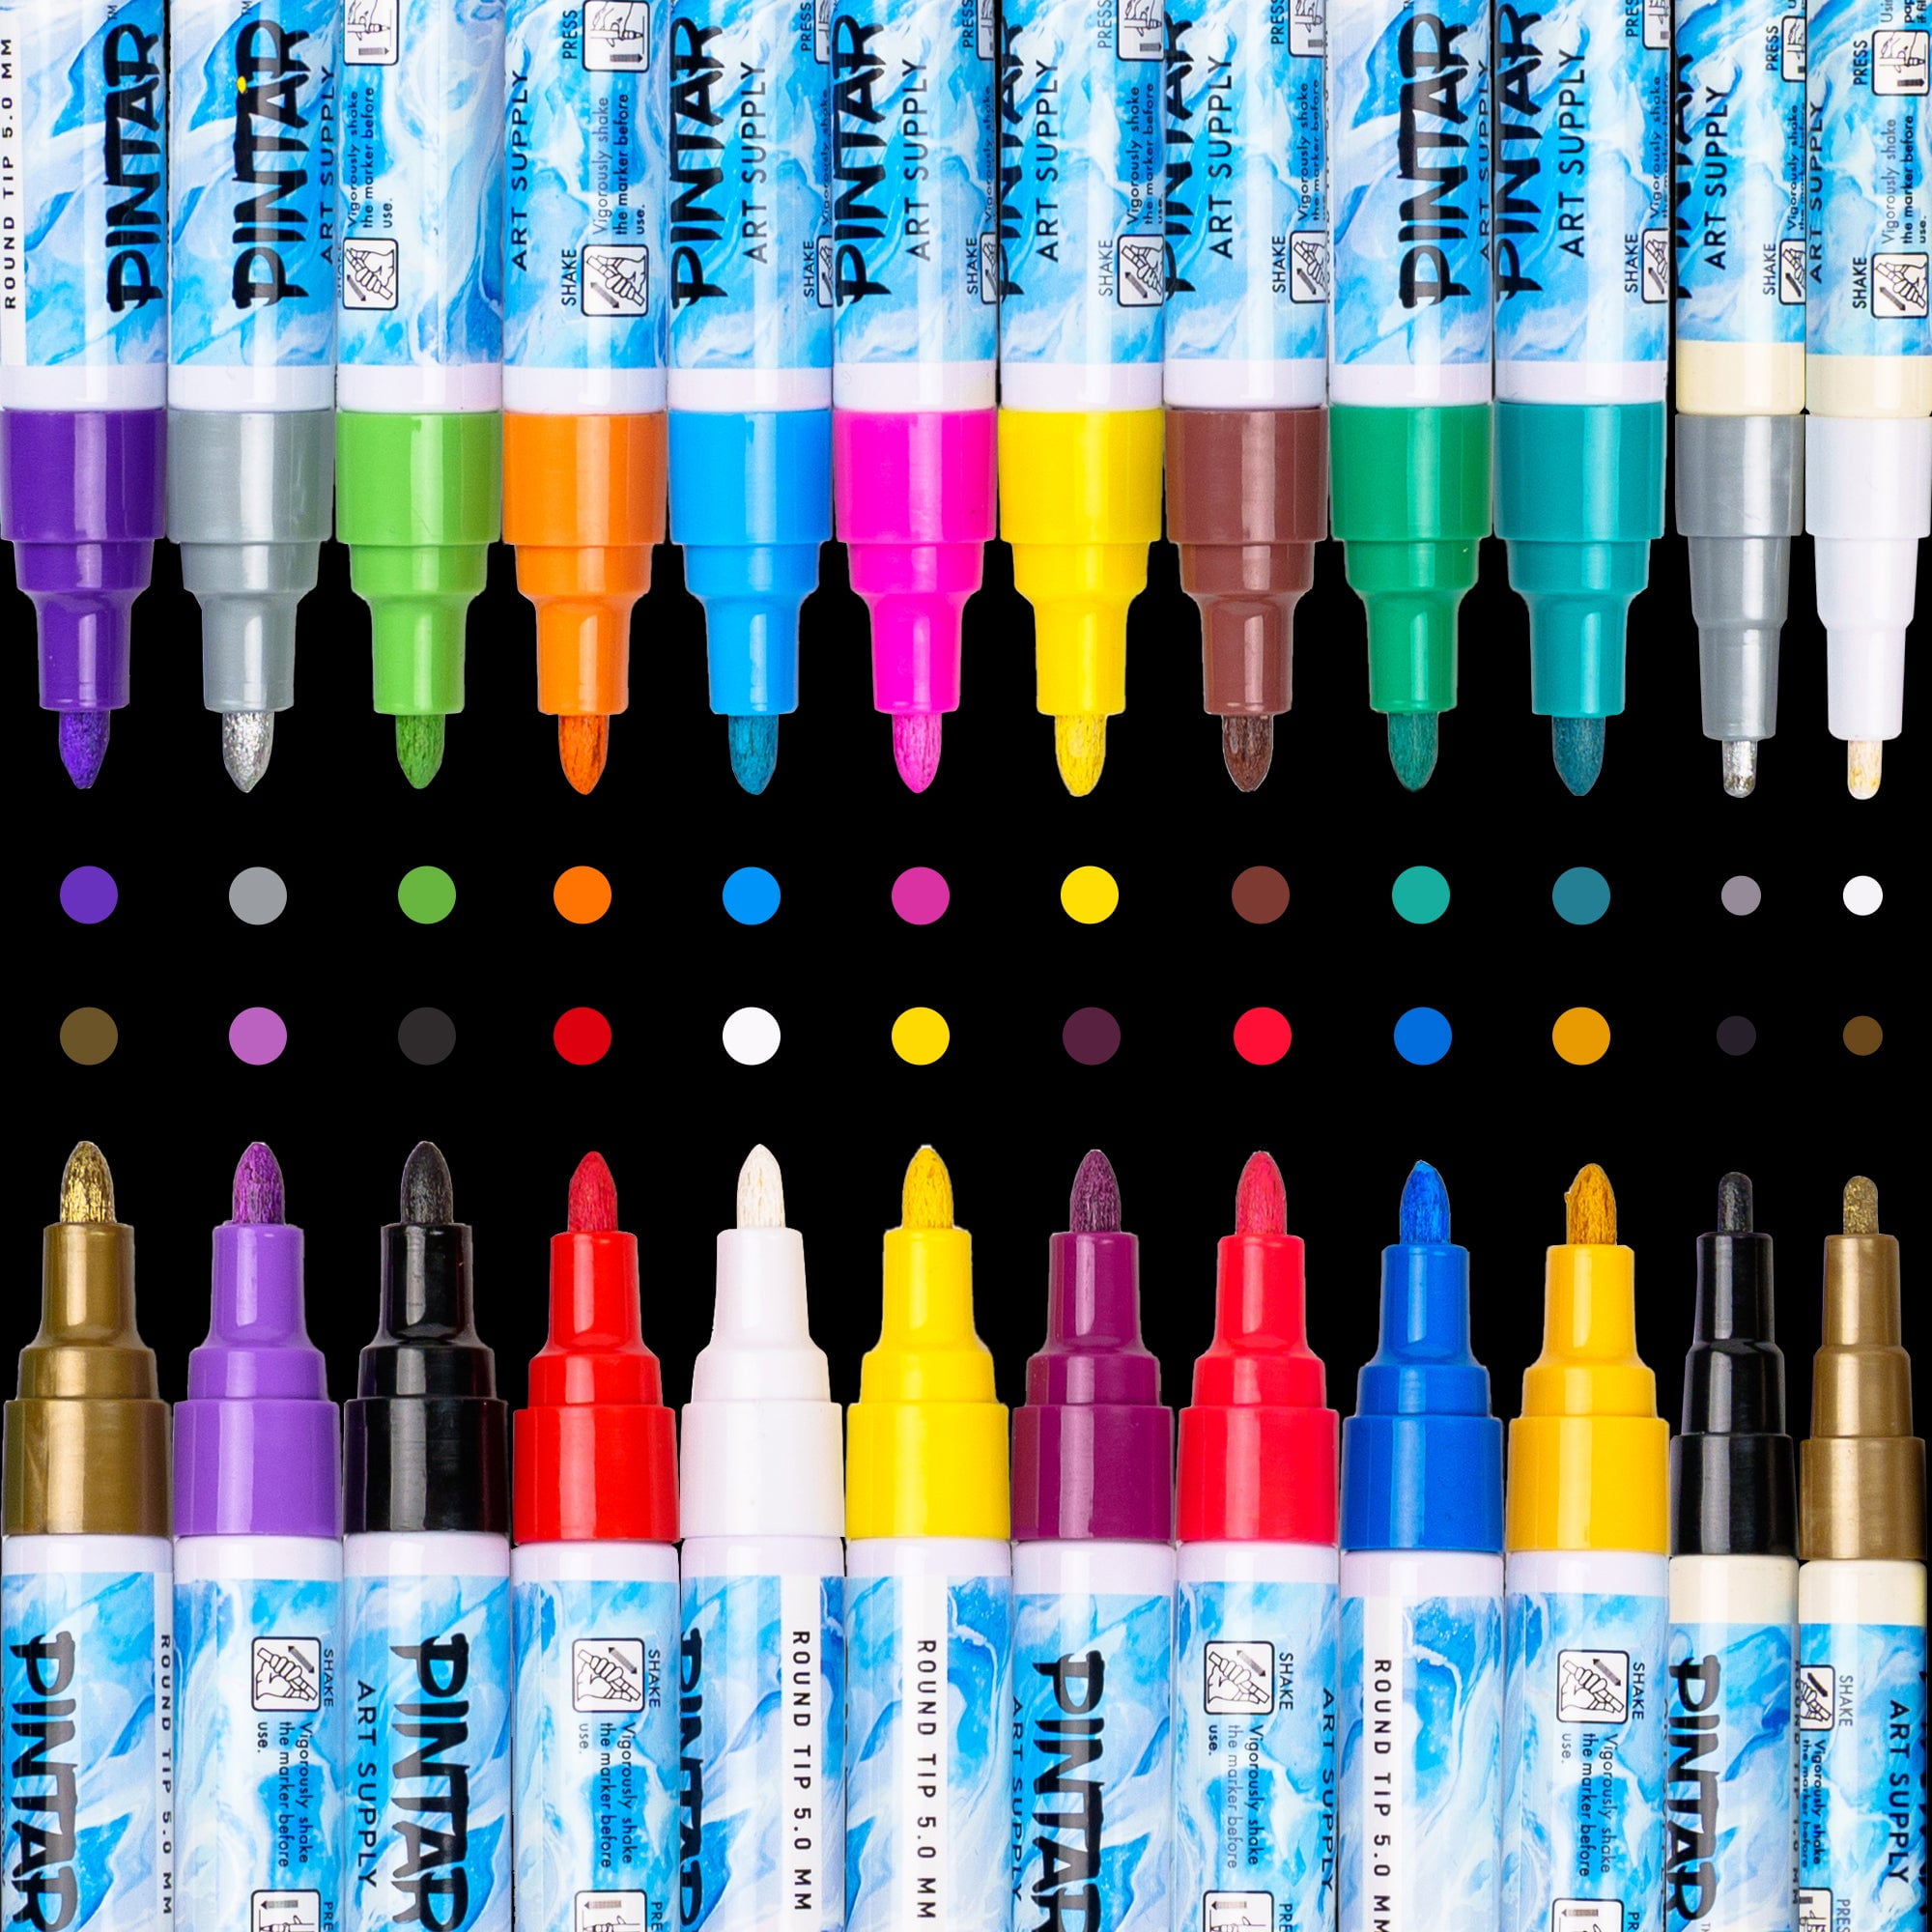 PINTAR Oil Based Paint Pens - Oil Paint Markers - Paint Pens For Rock  Painting,Glass, Wood, Plastic, Canvas, Paper, Metal, Ceramic, & Fabric - 20  Medium Tip & 4 Fine Tip Colored Markers 